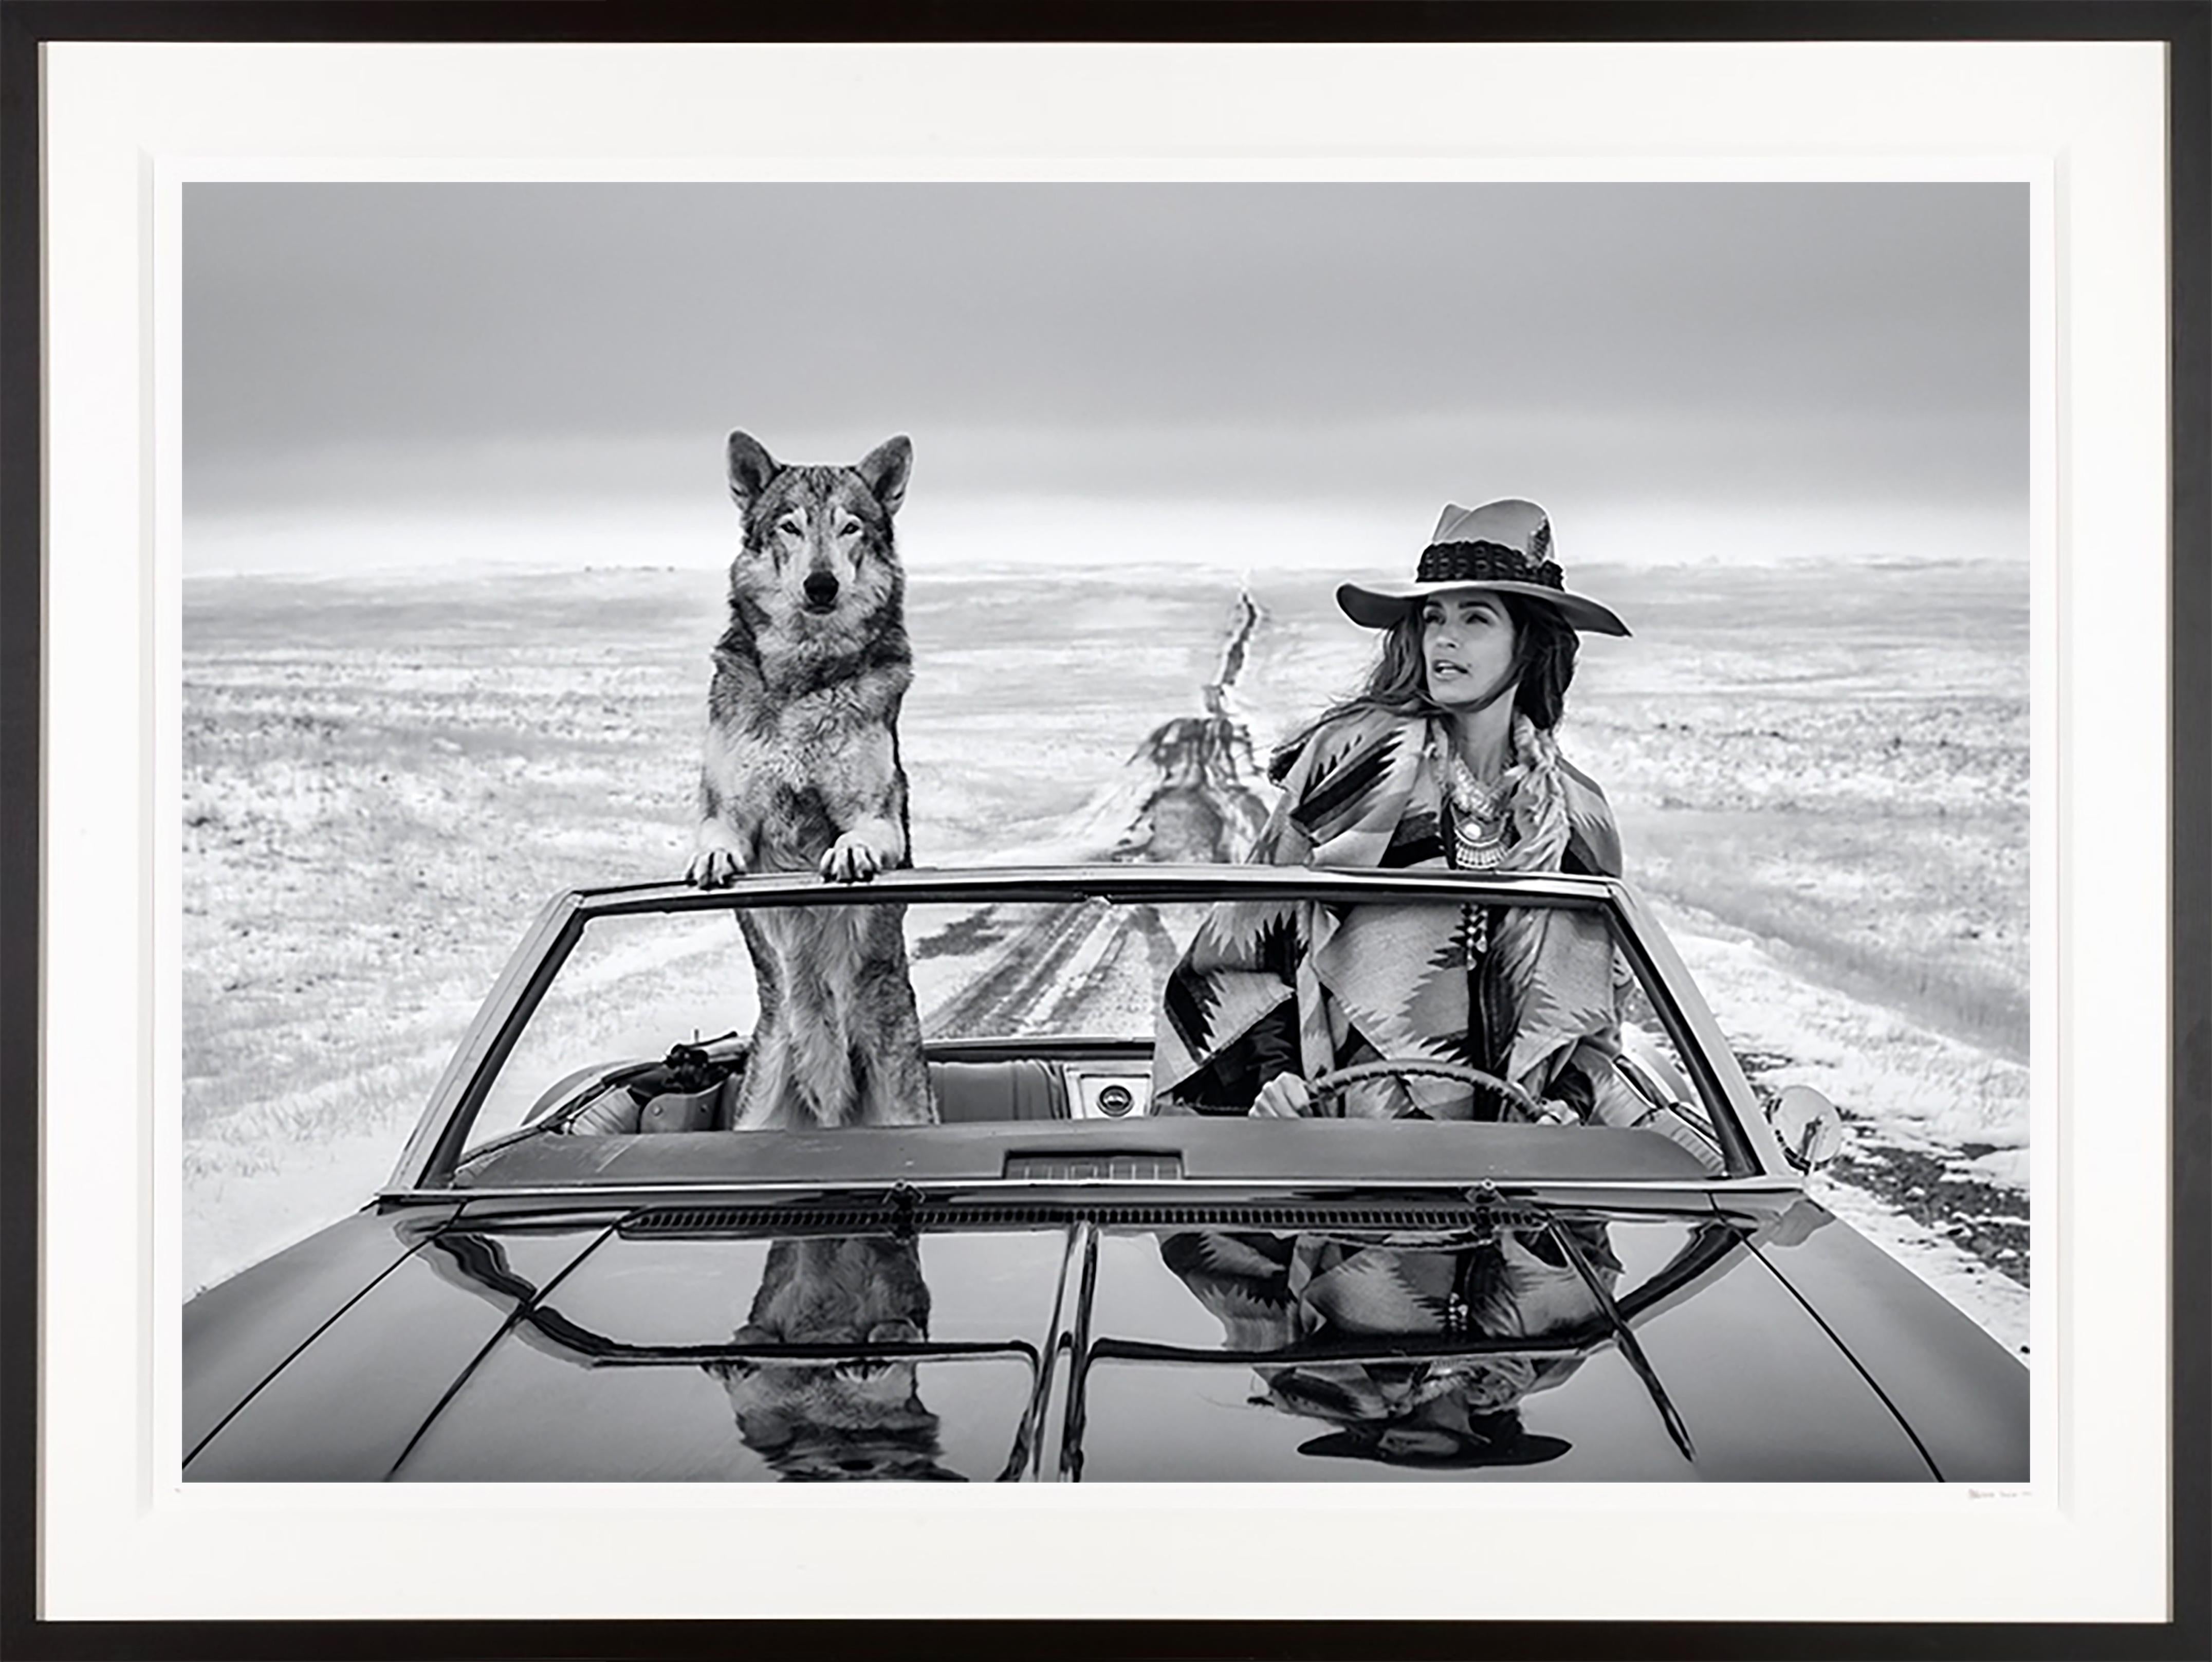 David Yarrow Black and White Photograph - "On The Road Again" Sexy Badass Cindy Crawford in a Vintage Car with a Wolf